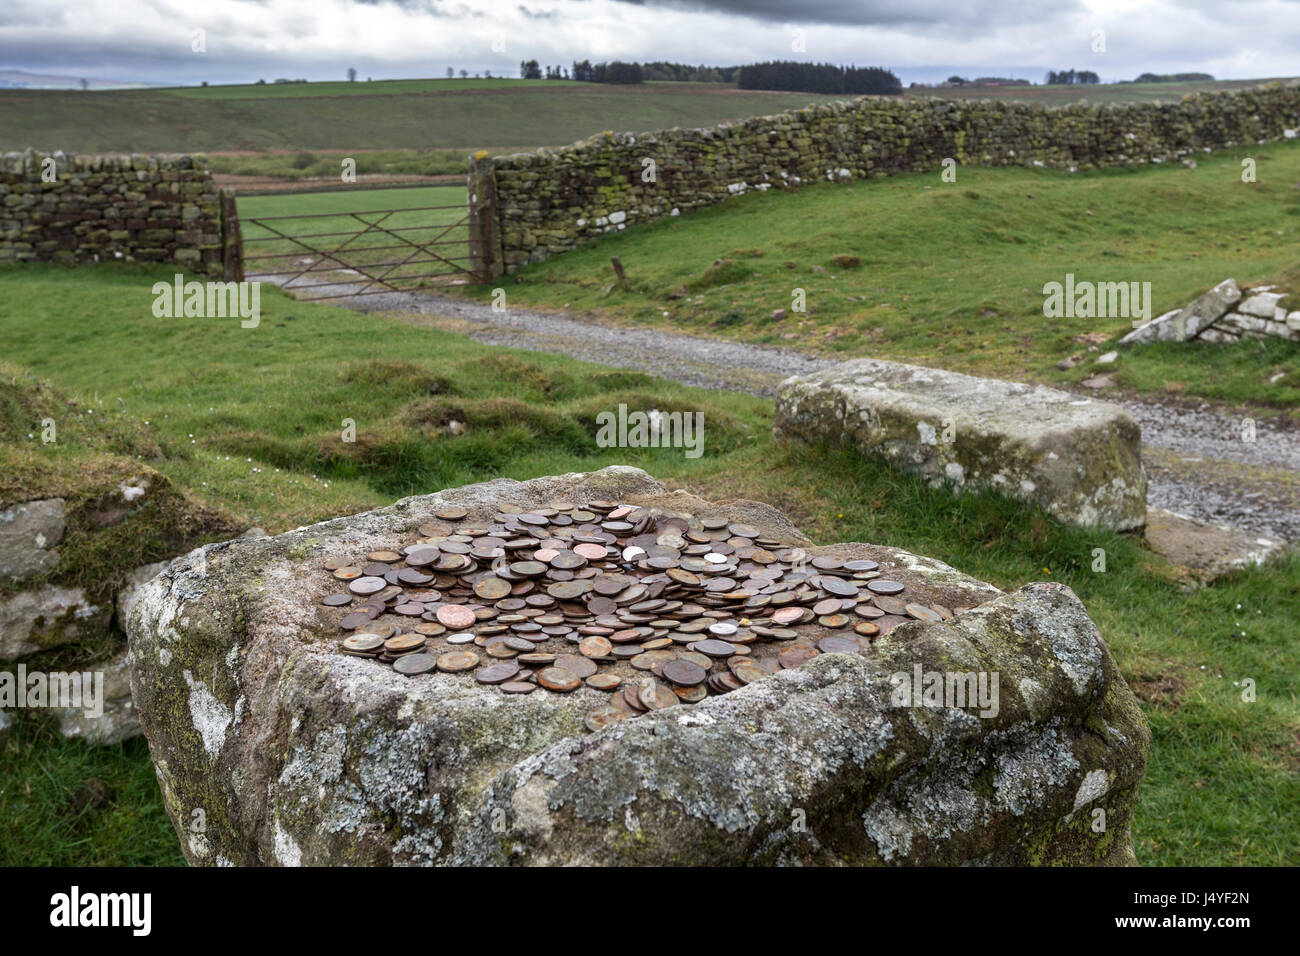 Altar Stone with Modern Day Votive Offerings, Aesica Roman Fort (Great Chesters) Hadrian's Wall, Haltwhistle, Northumberland, UK Stock Photo